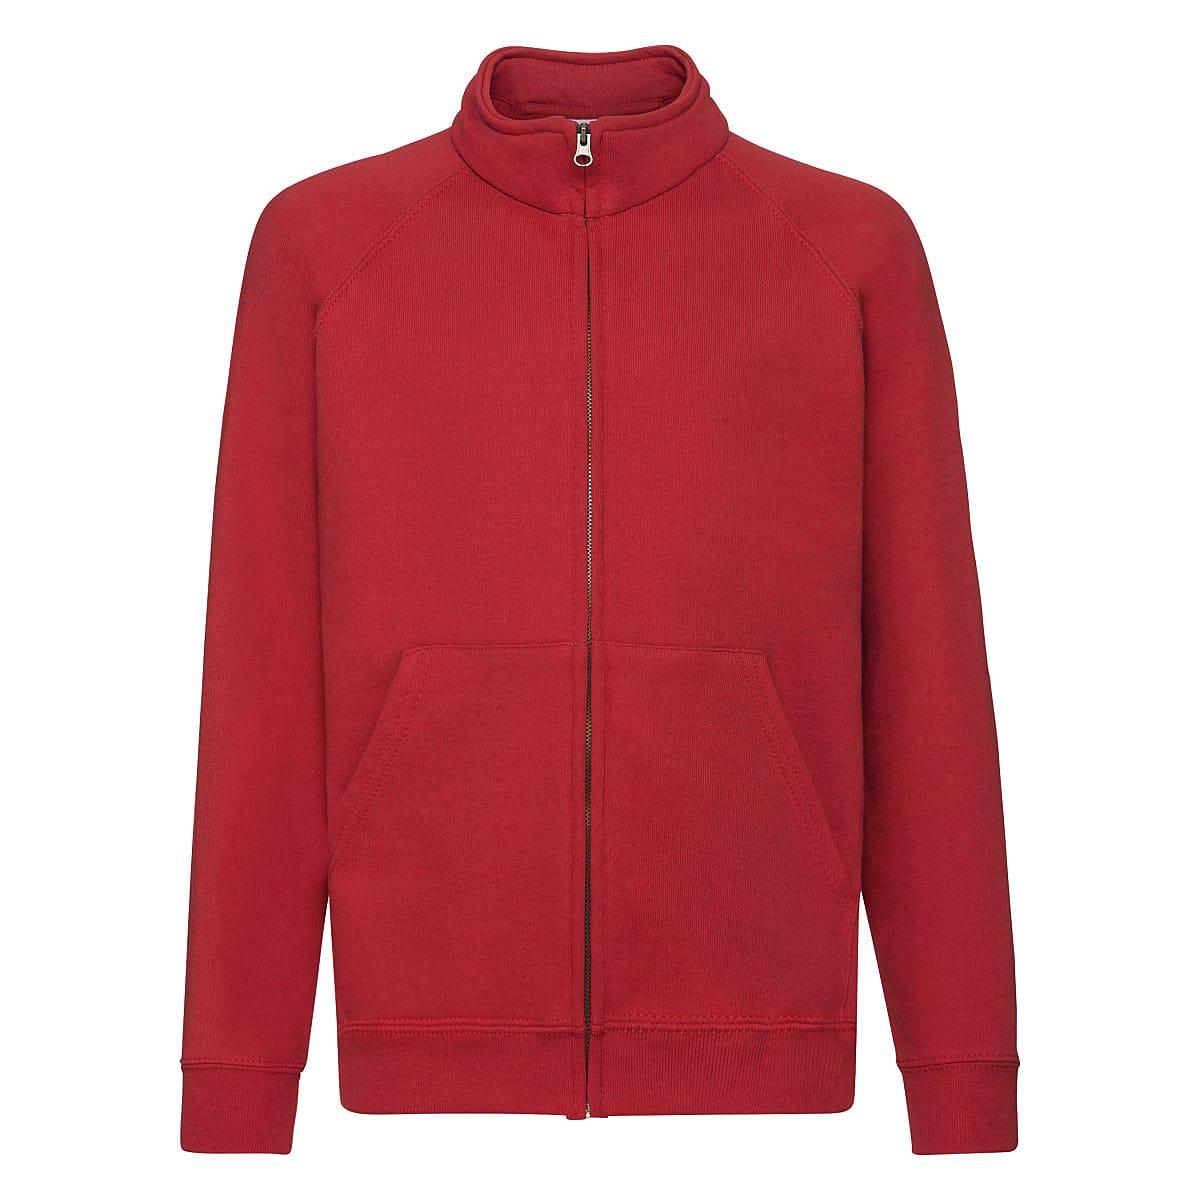 Fruit Of The Loom Childrens Sweat Jacket in Red (Product Code: 62005)